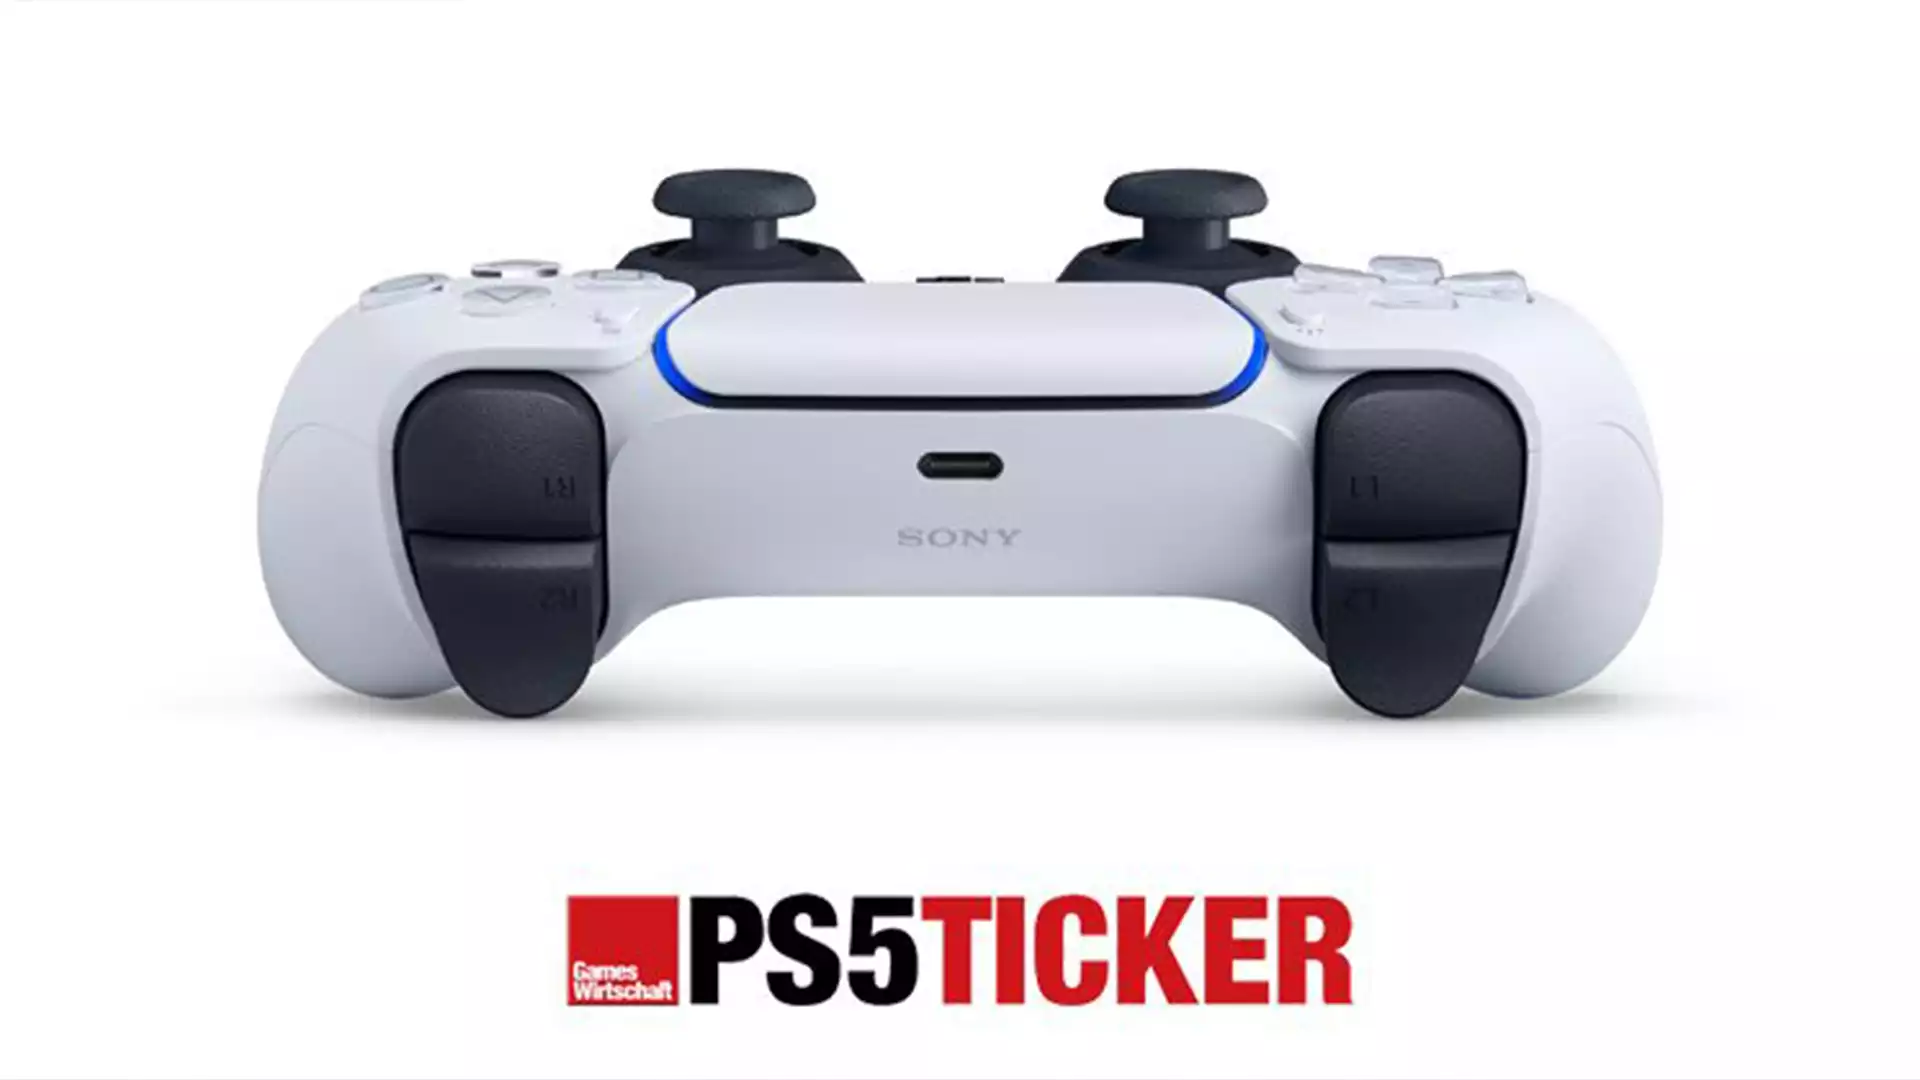 PS5 ticker The PlayStation 5 situation on January 6, 2022 (Update)